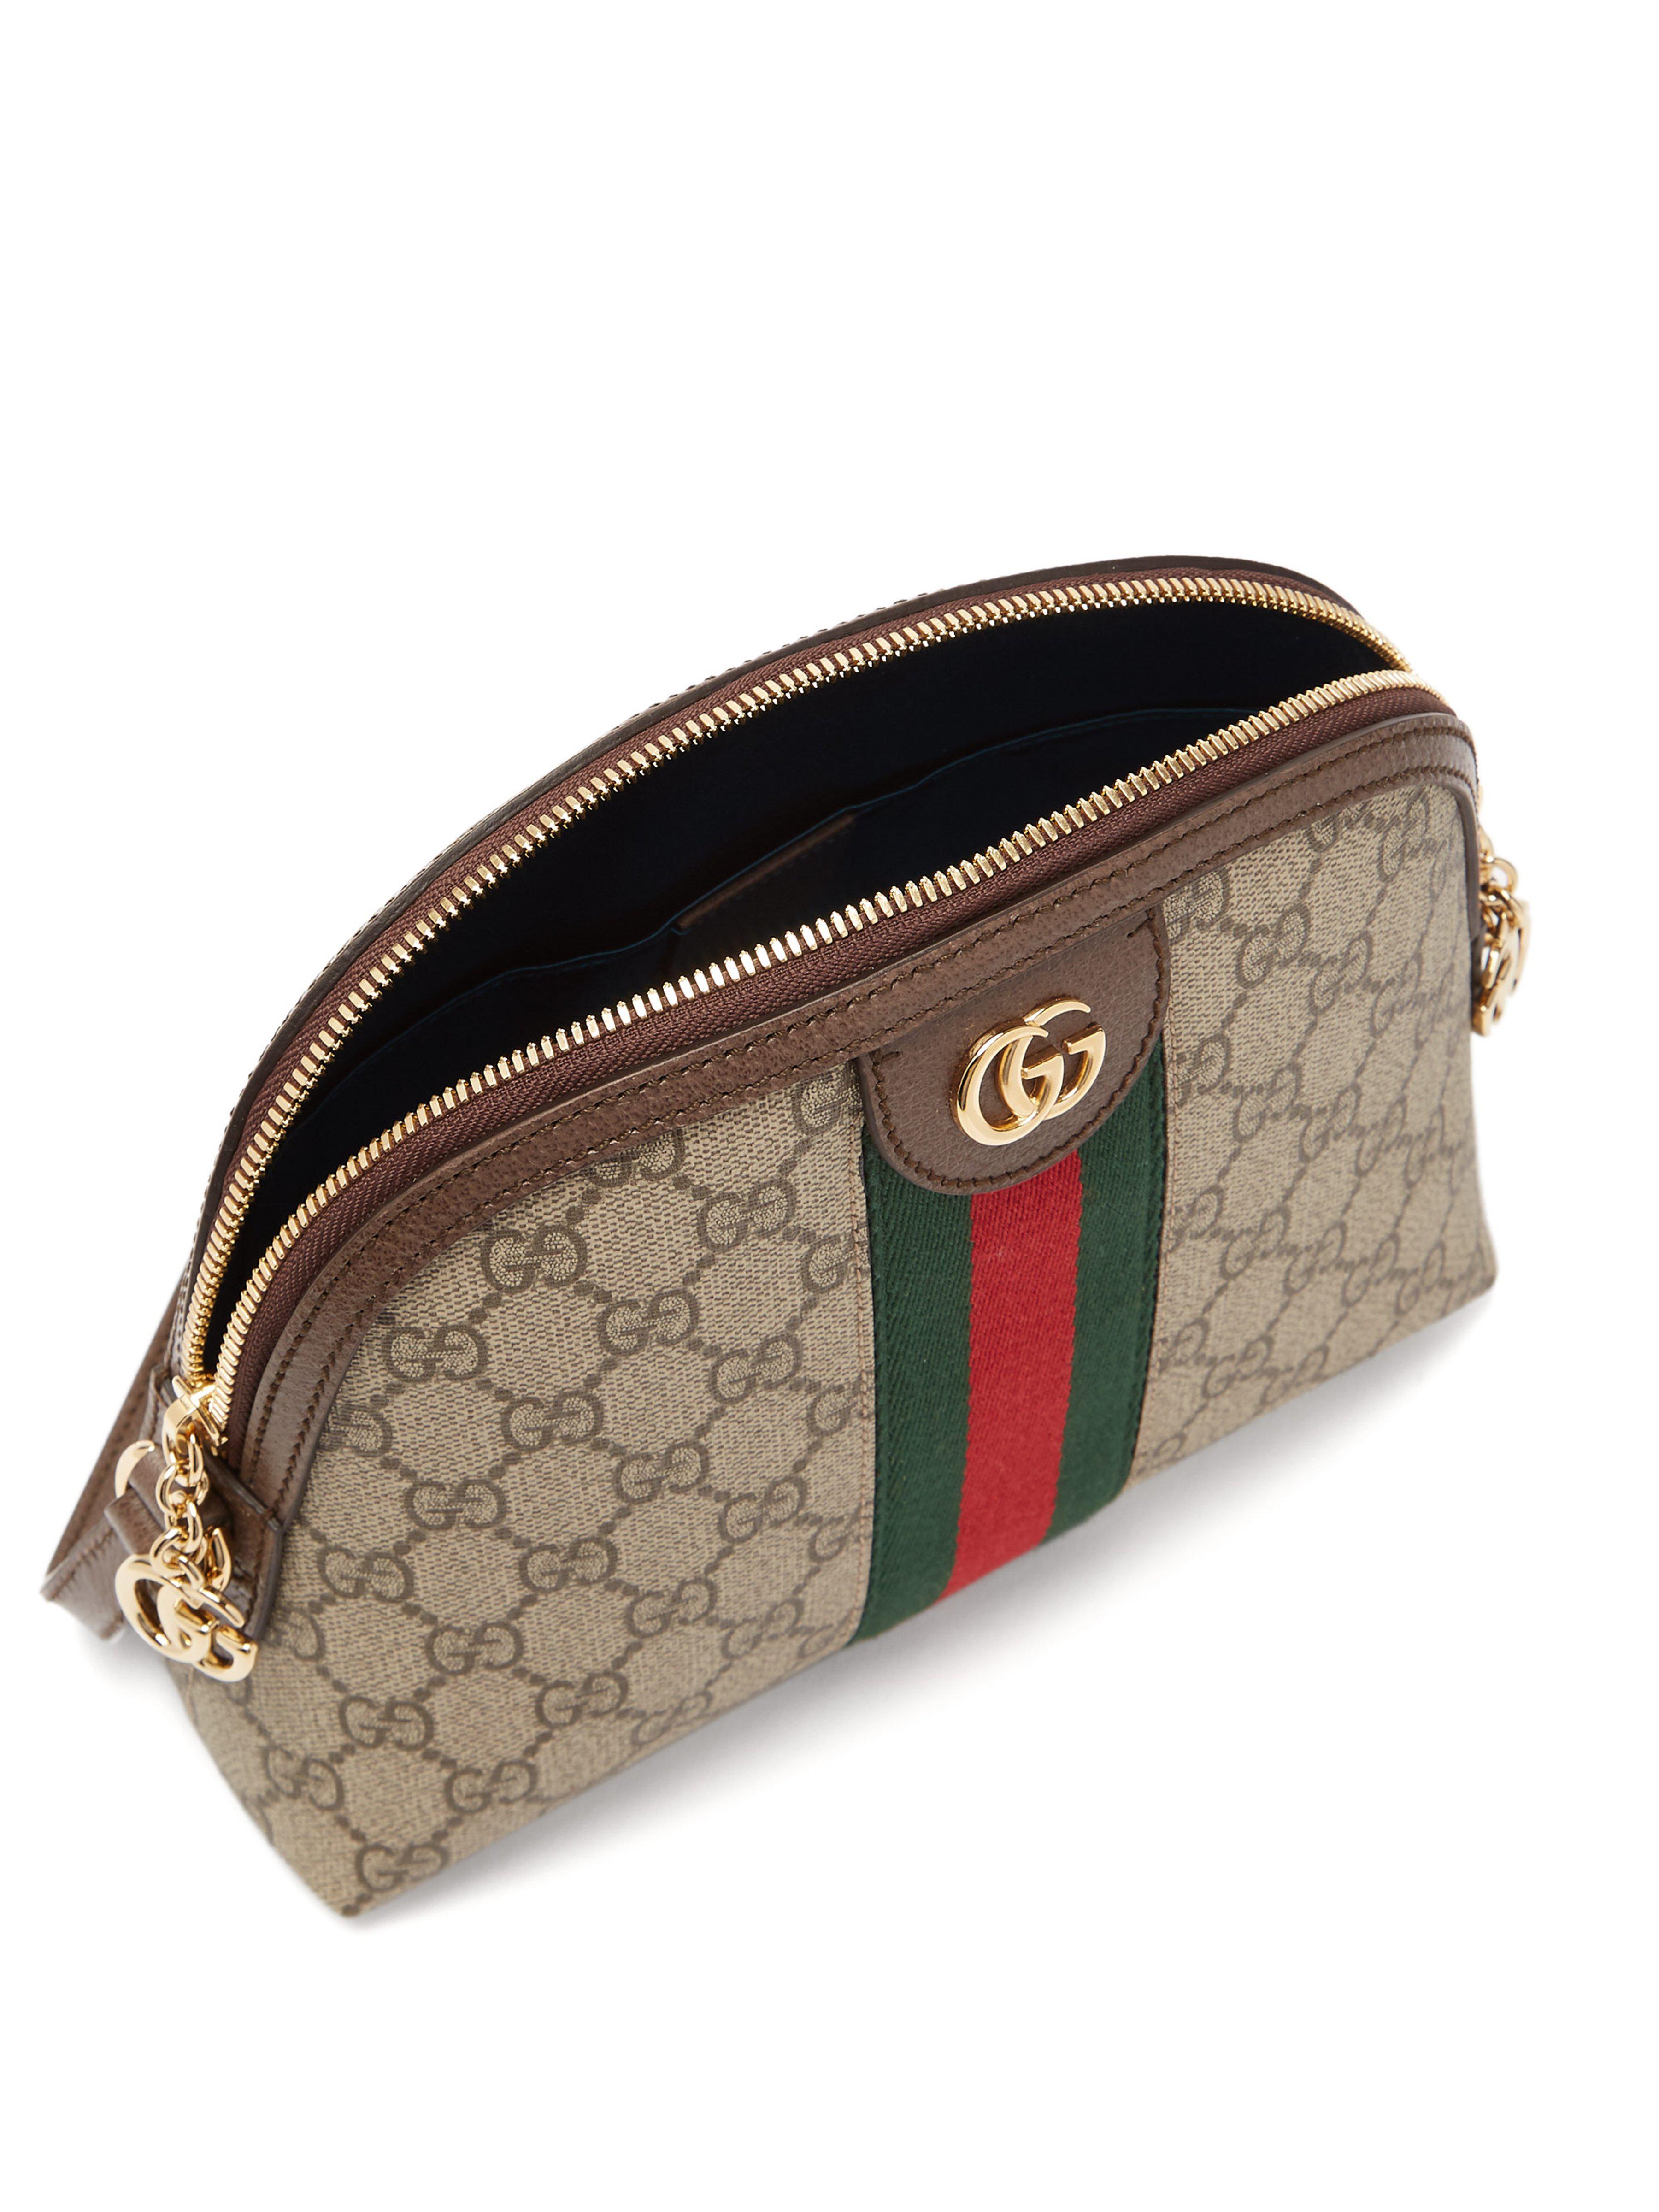 Gucci Canvas Ophidia Gg Supreme Cross Body Bag - Lyst